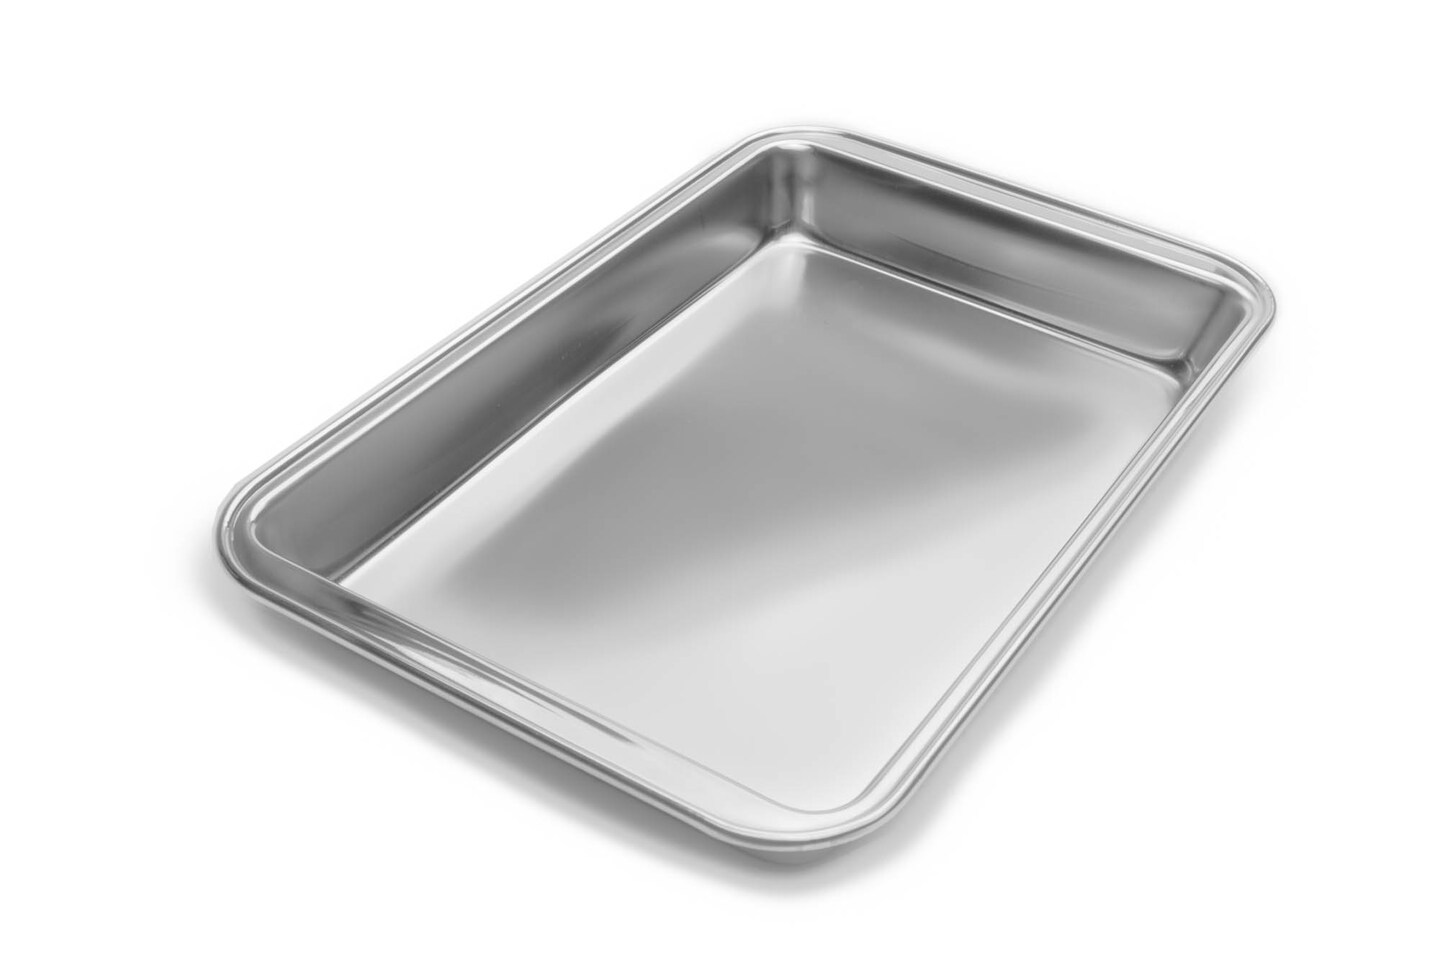 11 x 7.125 x 1.25 Inches, Stainless Steel Bake Pan